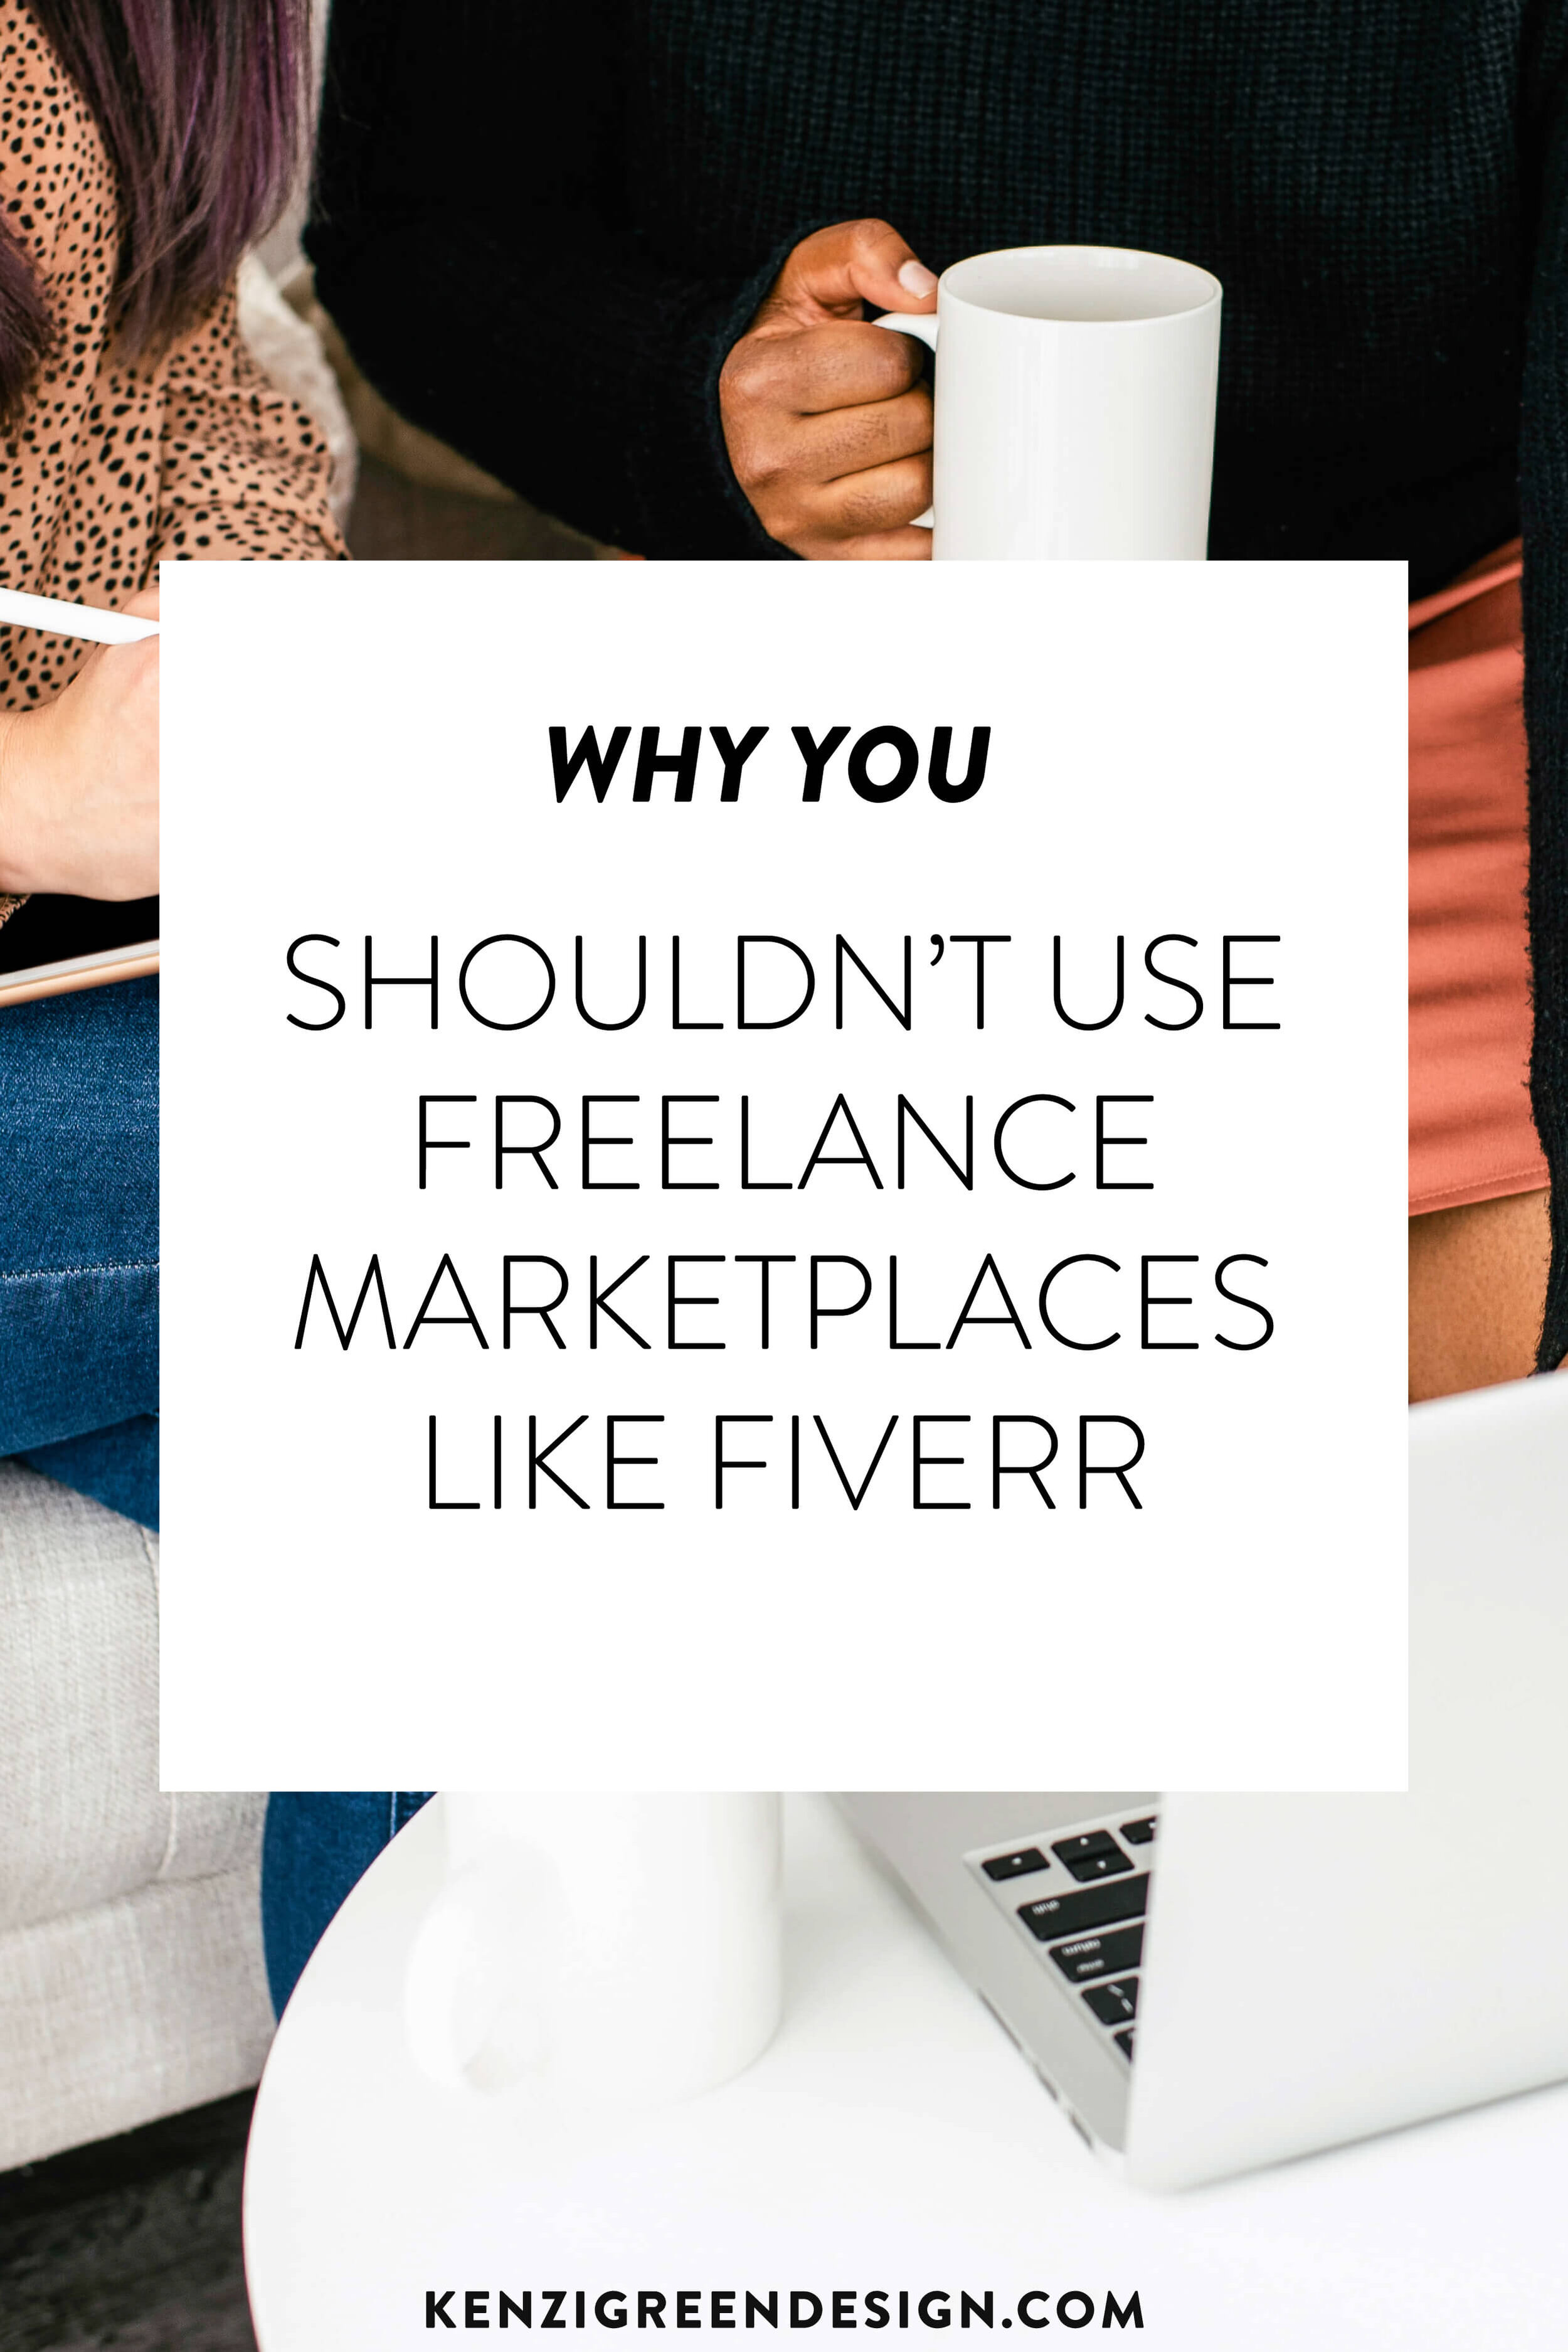 Why you shouldn't use freelance marketplaces like Fiverr